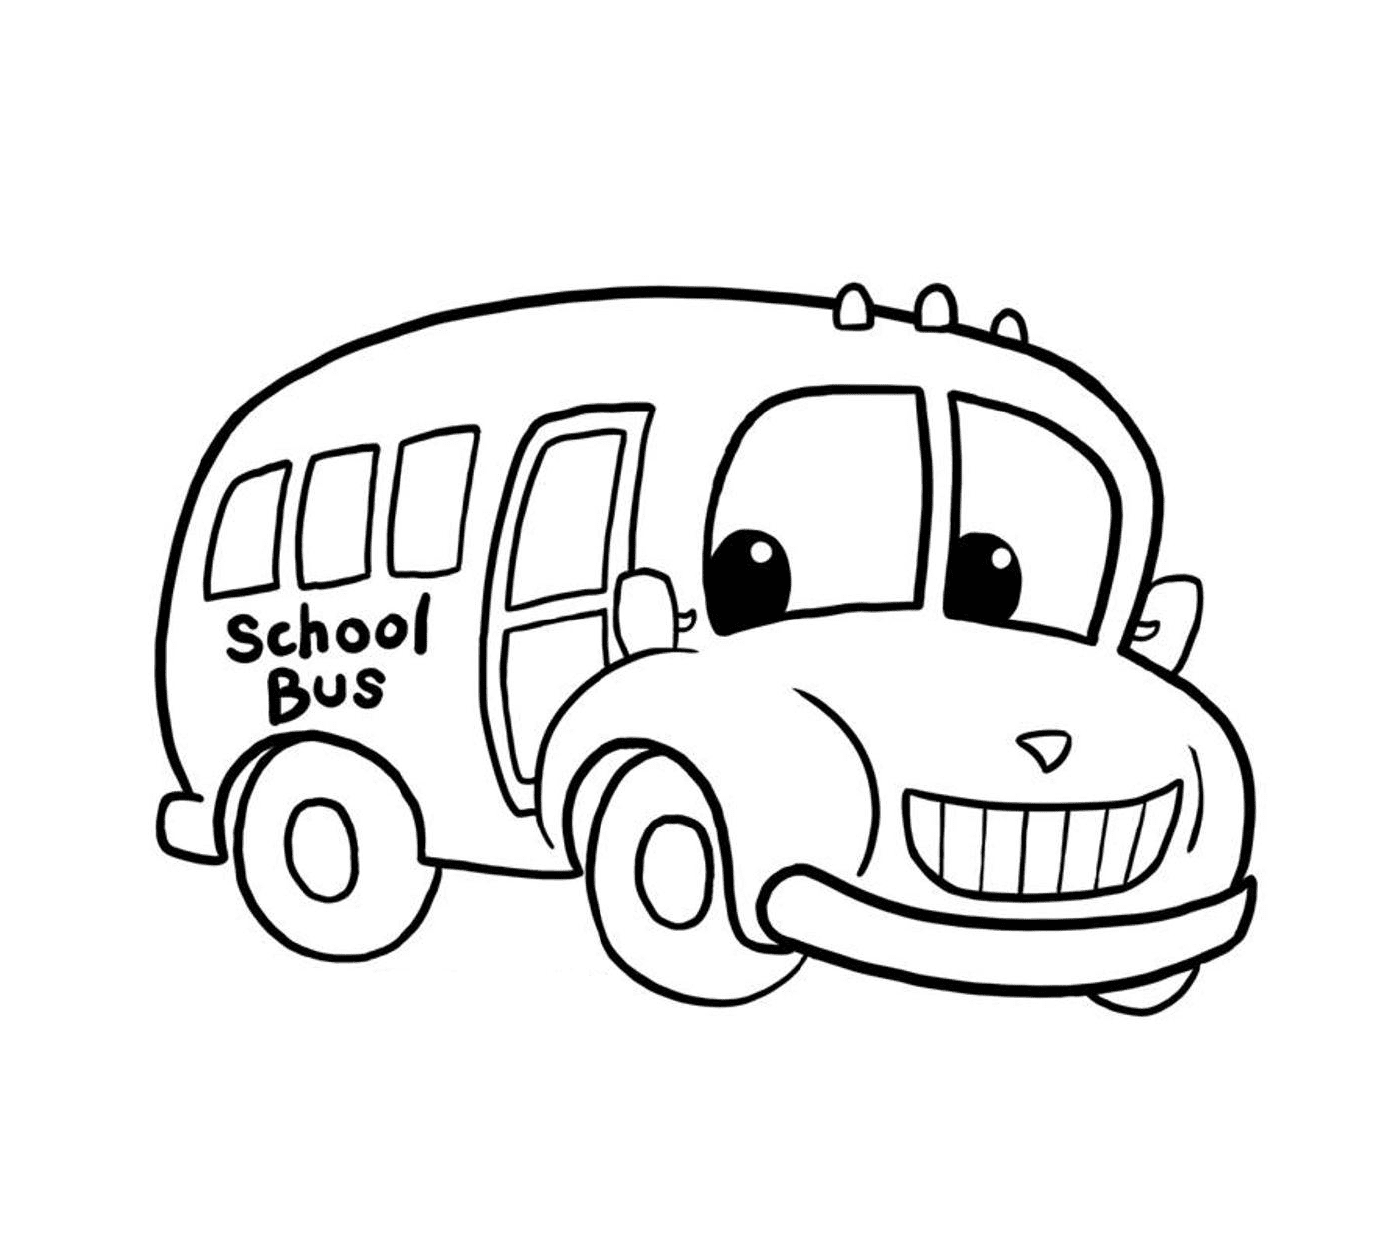  A school bus transports the children 